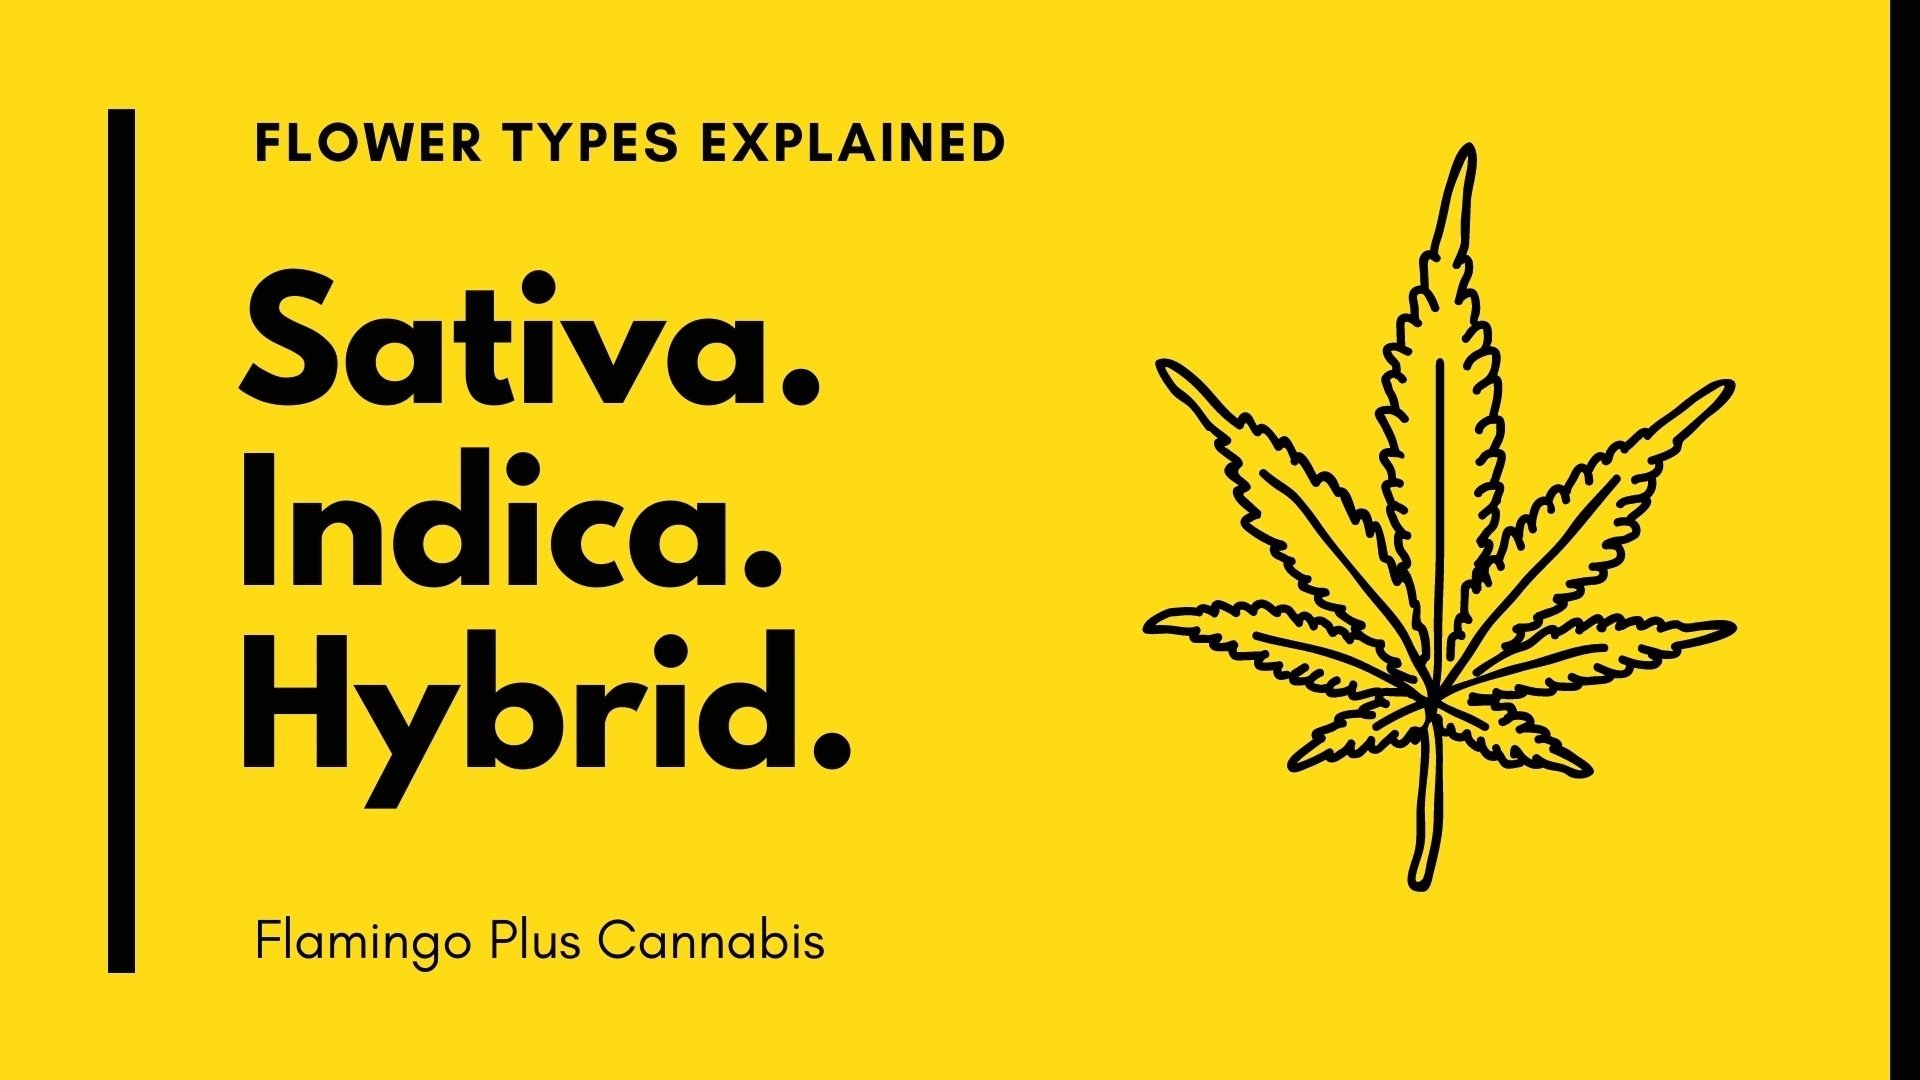 Sativa, Indica, Hybrid. What is what?